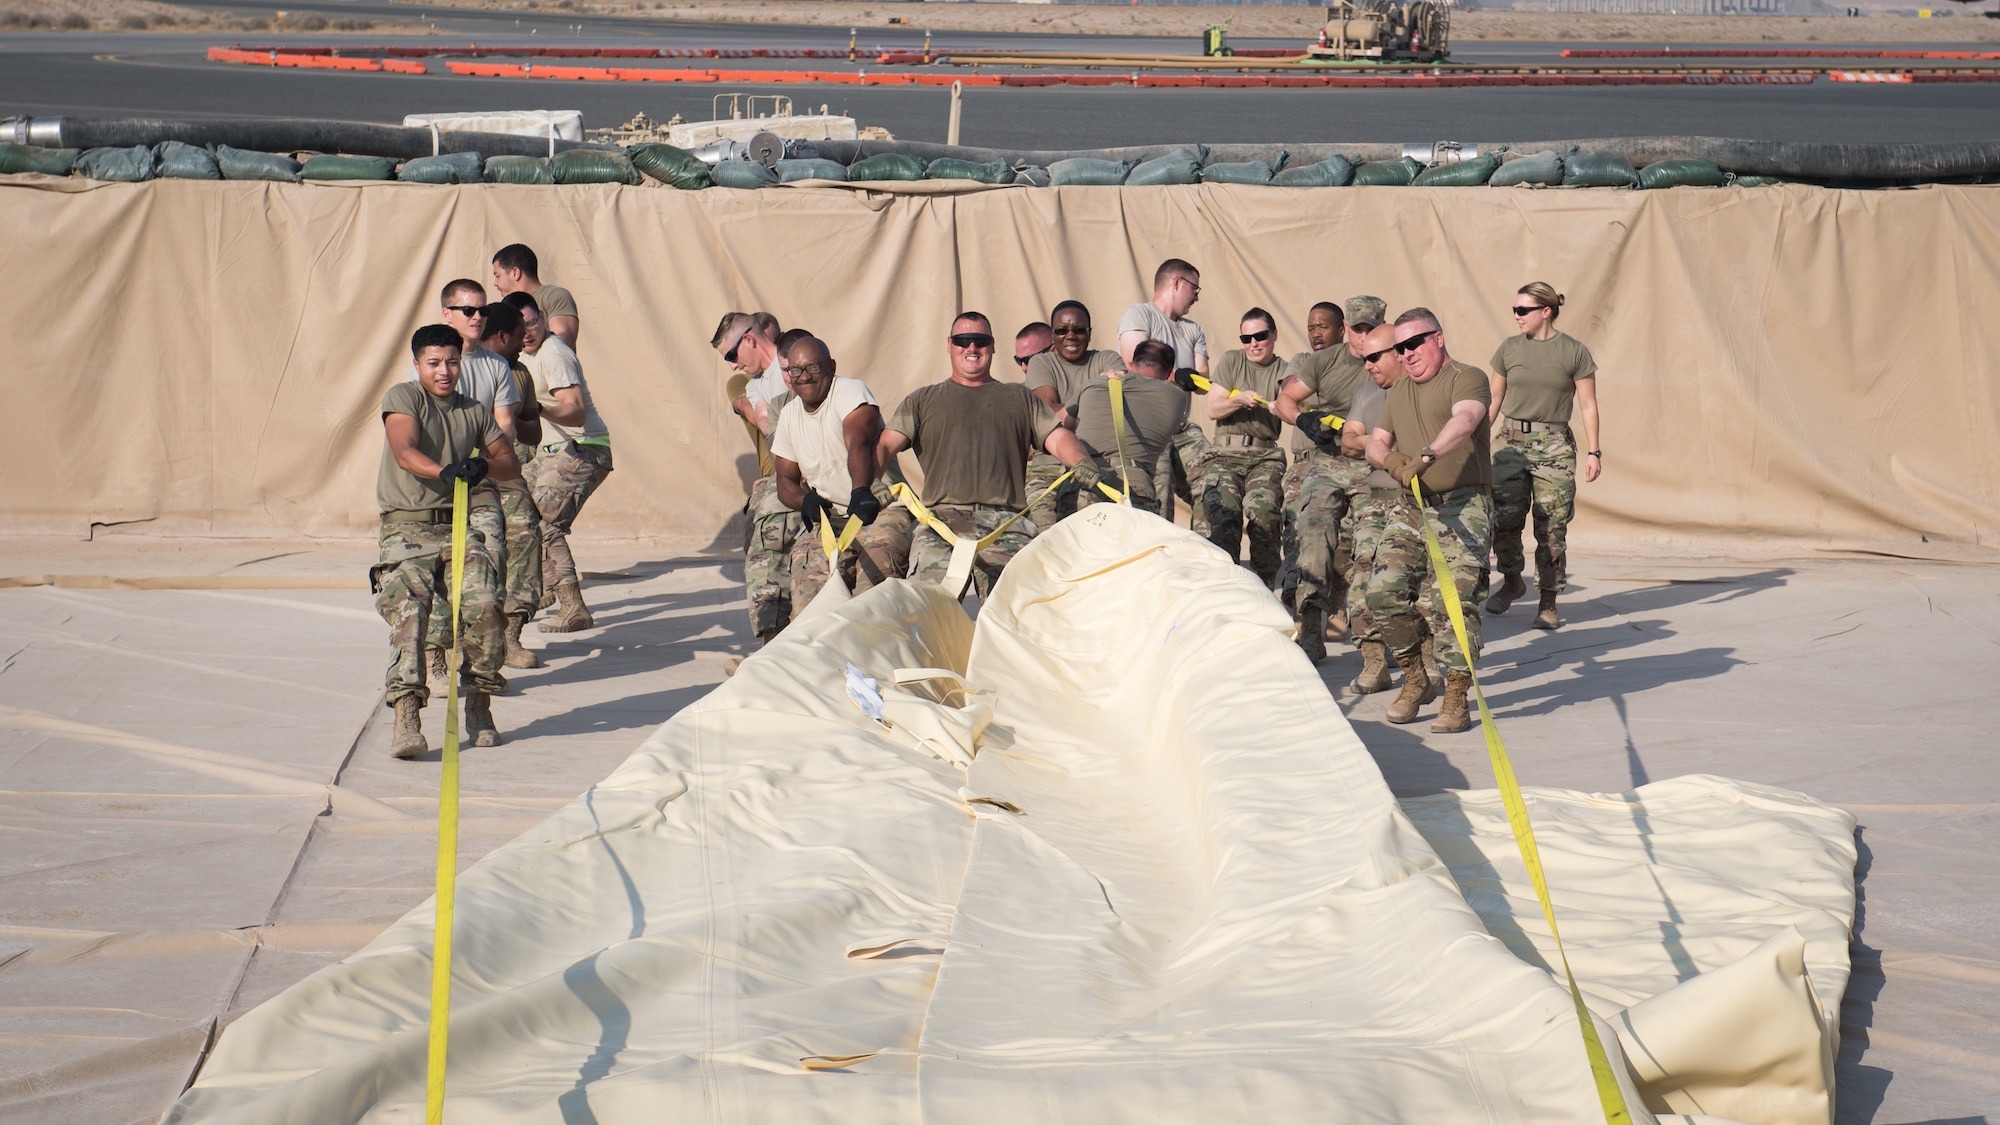 U.S. Air Force Airmen, from the 386th Expeditionary Logistics Readiness Squadron fuels management flight, Col. Rod Simpson, 386th Air Expeditionary Wing commander (second from right) and Chief Master Sgt. Jason Colon, 386th AEW command chief (third from right), drag an empty fuel bladder into position at Ali Al Salem Air Base, Kuwait, Oct. 7, 2019. An empty fuel bladder can weigh as much as 4,600 pounds. (U.S. Air Force photo by Tech. Sgt. Daniel Martinez)